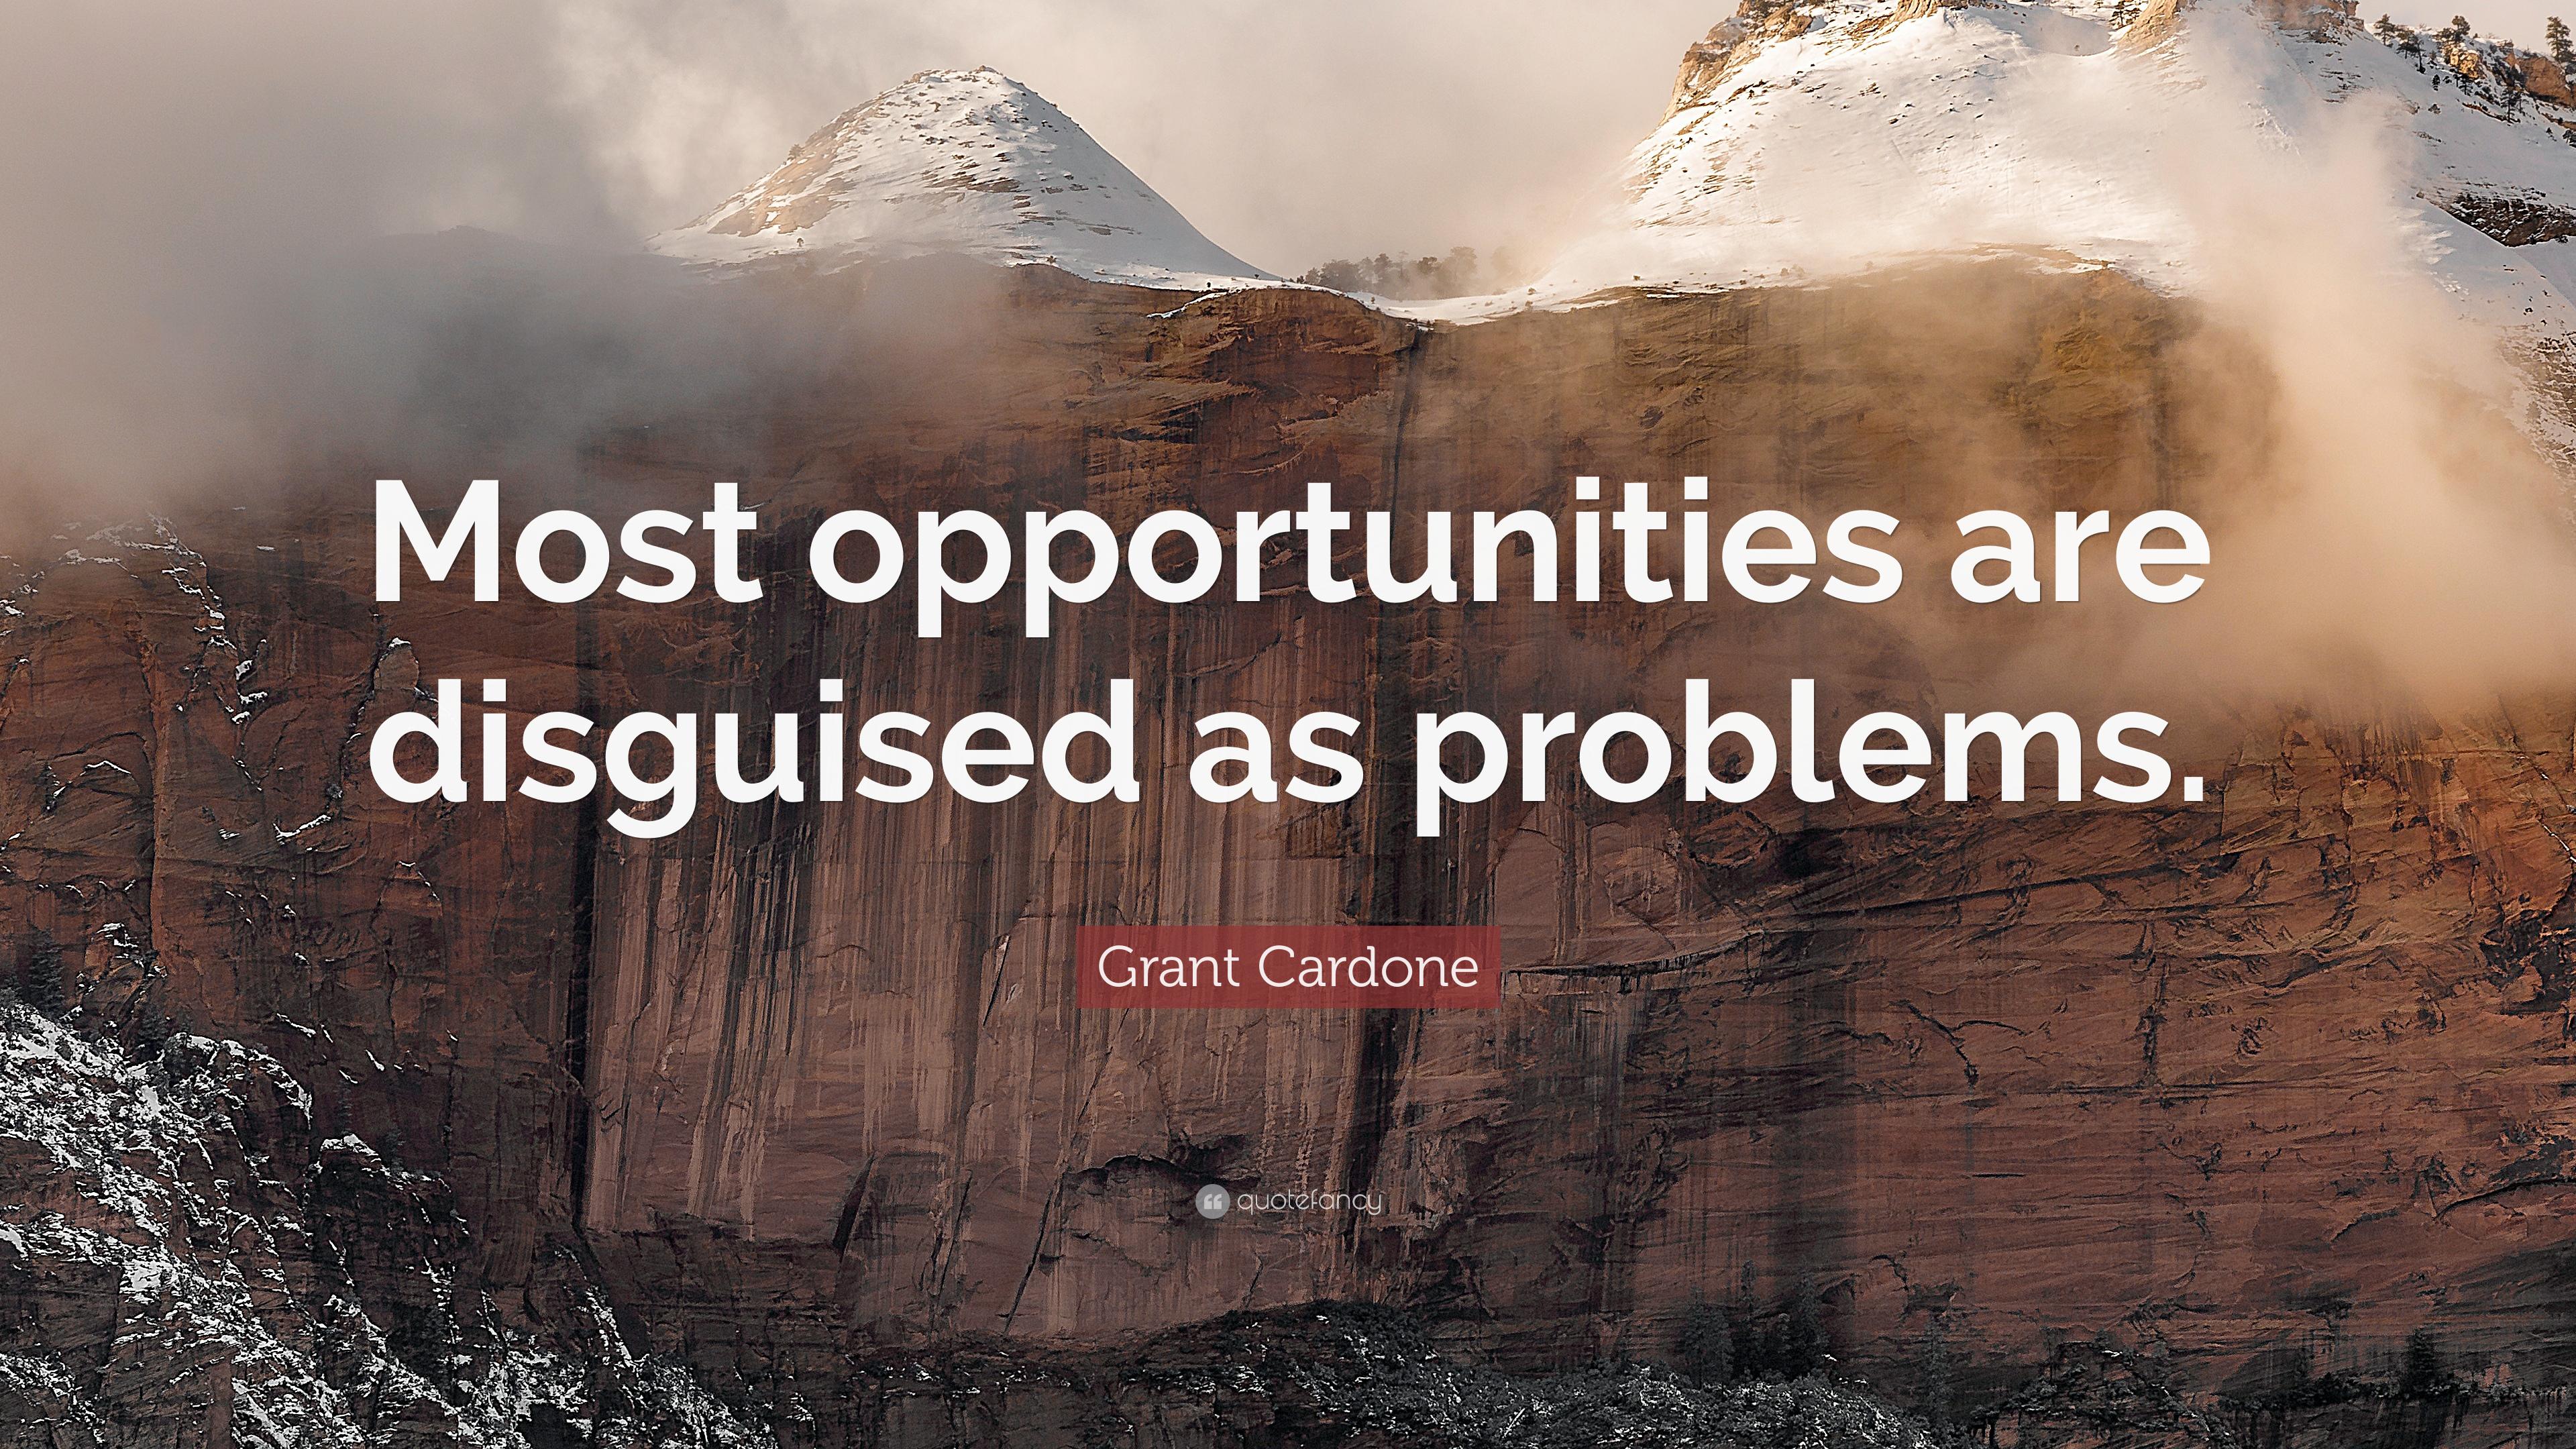 Grant Cardone Quote: “Most opportunities are disguised as